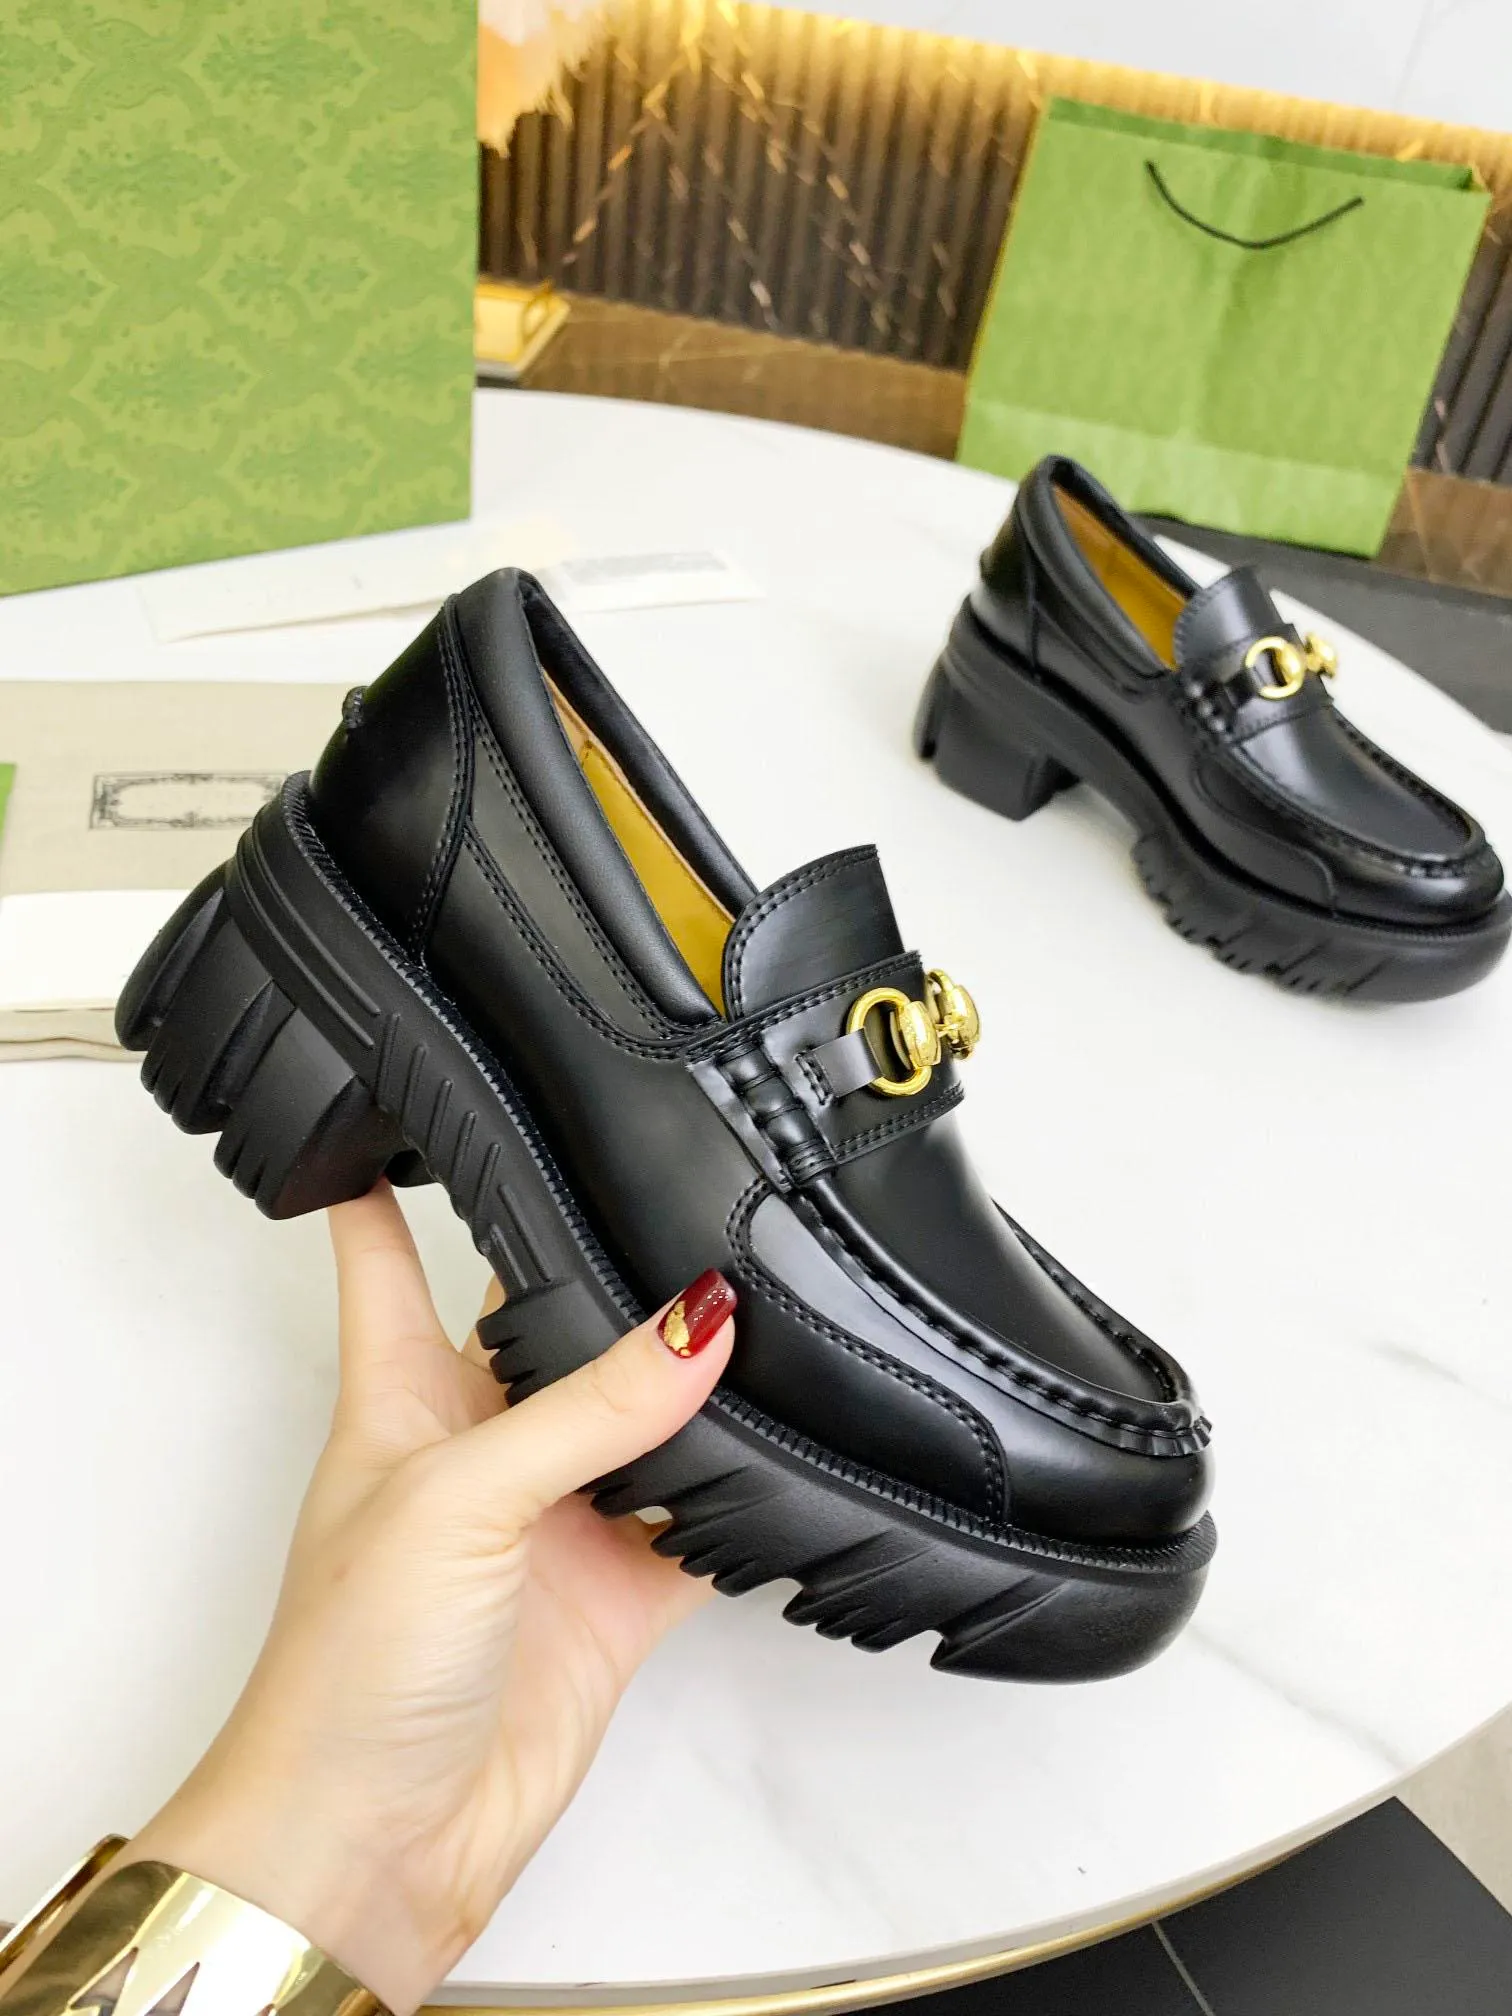 Women ankle boot with Interlocking new Luxurious designer Warm and stylish shoes size 35-40